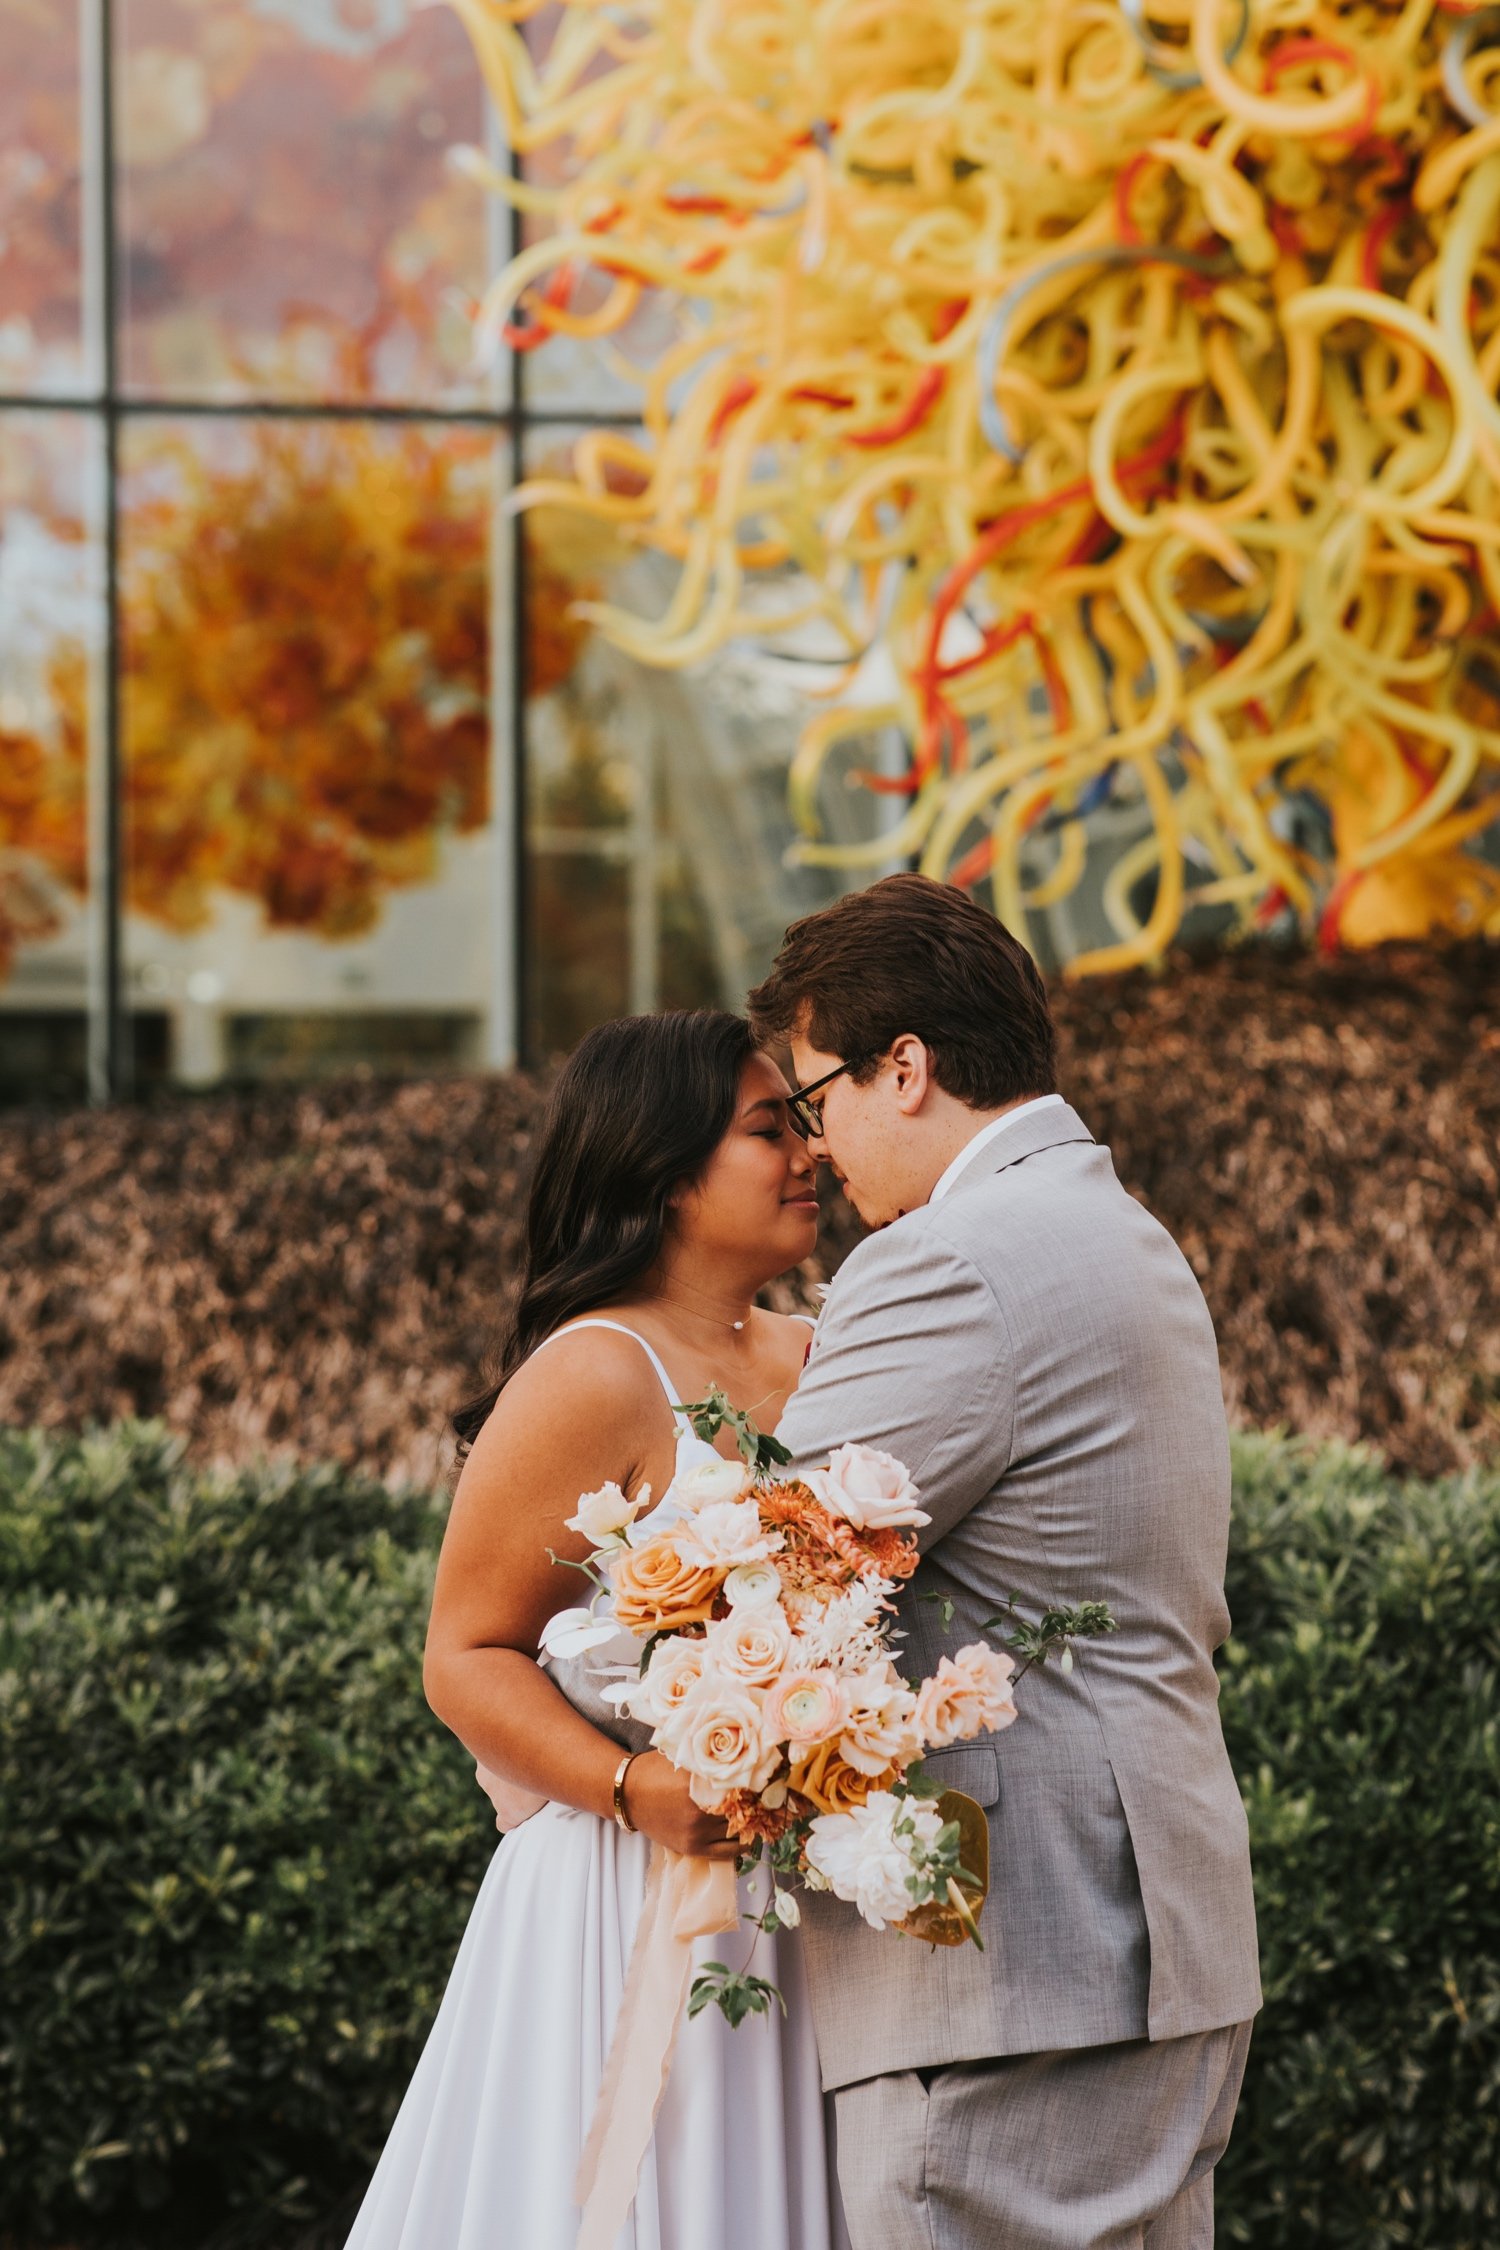 Chihuly Garden and Glass, Hudson Valley Wedding Photographer, Seattle Wedding, Chihuly Wedding, Chihuly Garden and Glass Wedding, Washington Wedding